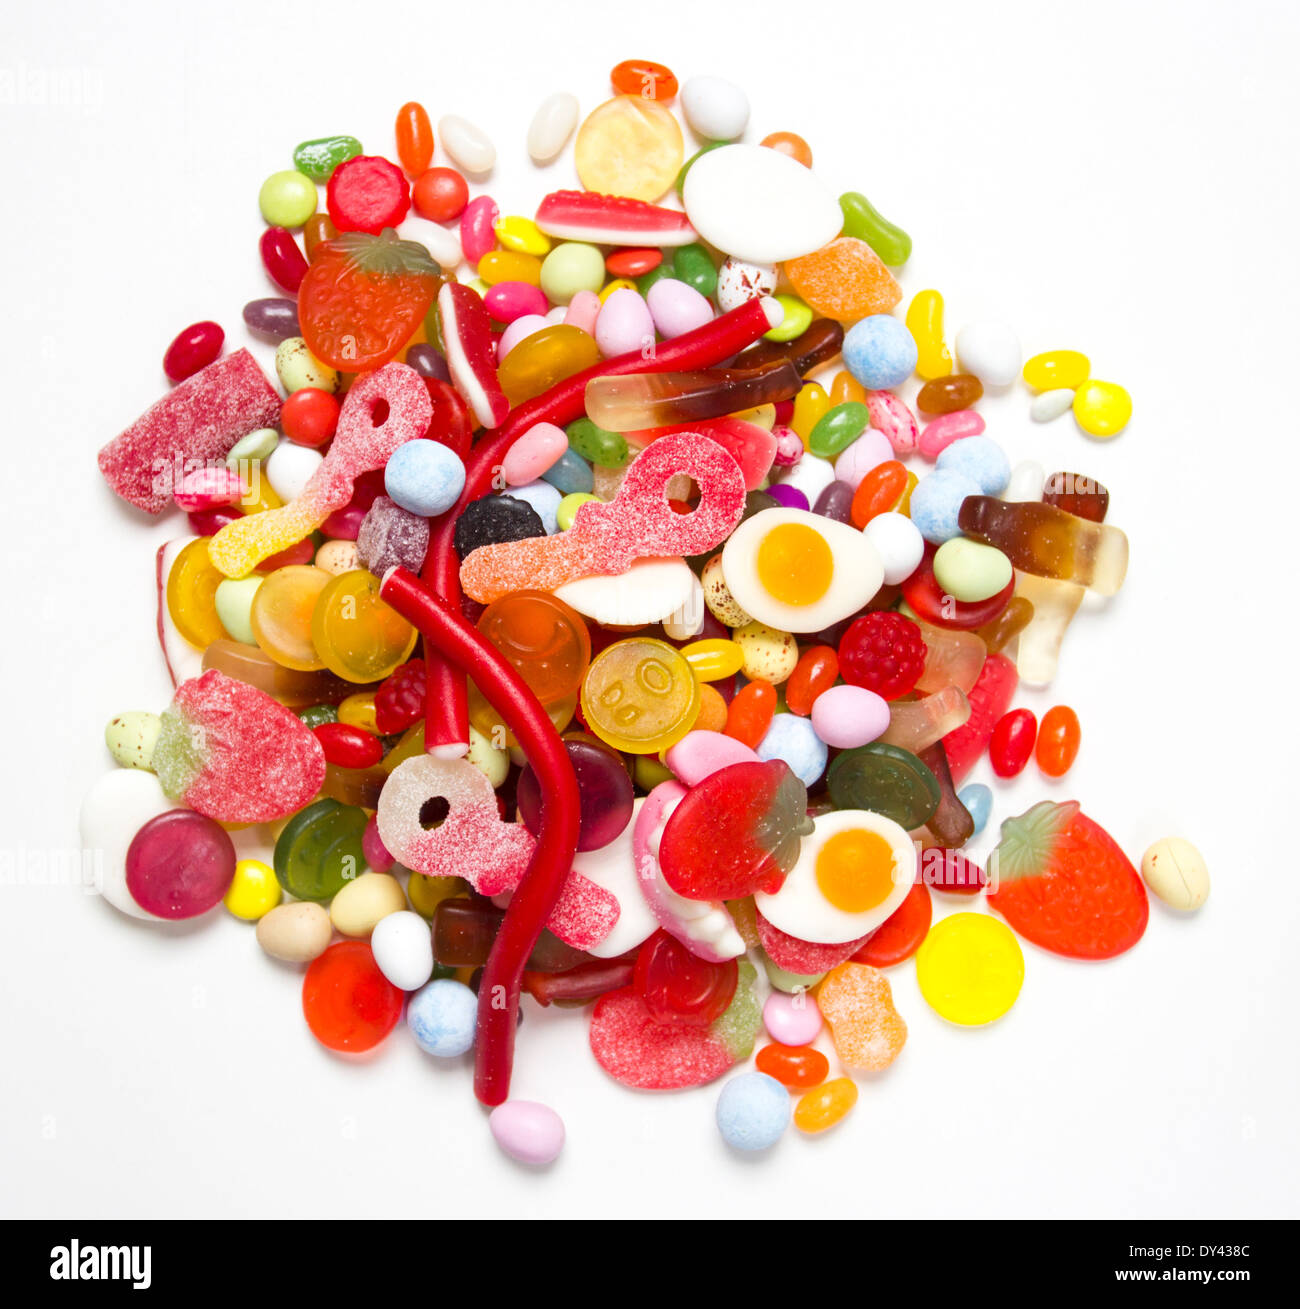 A pile of colourful sweets on a white surface Stock Photo